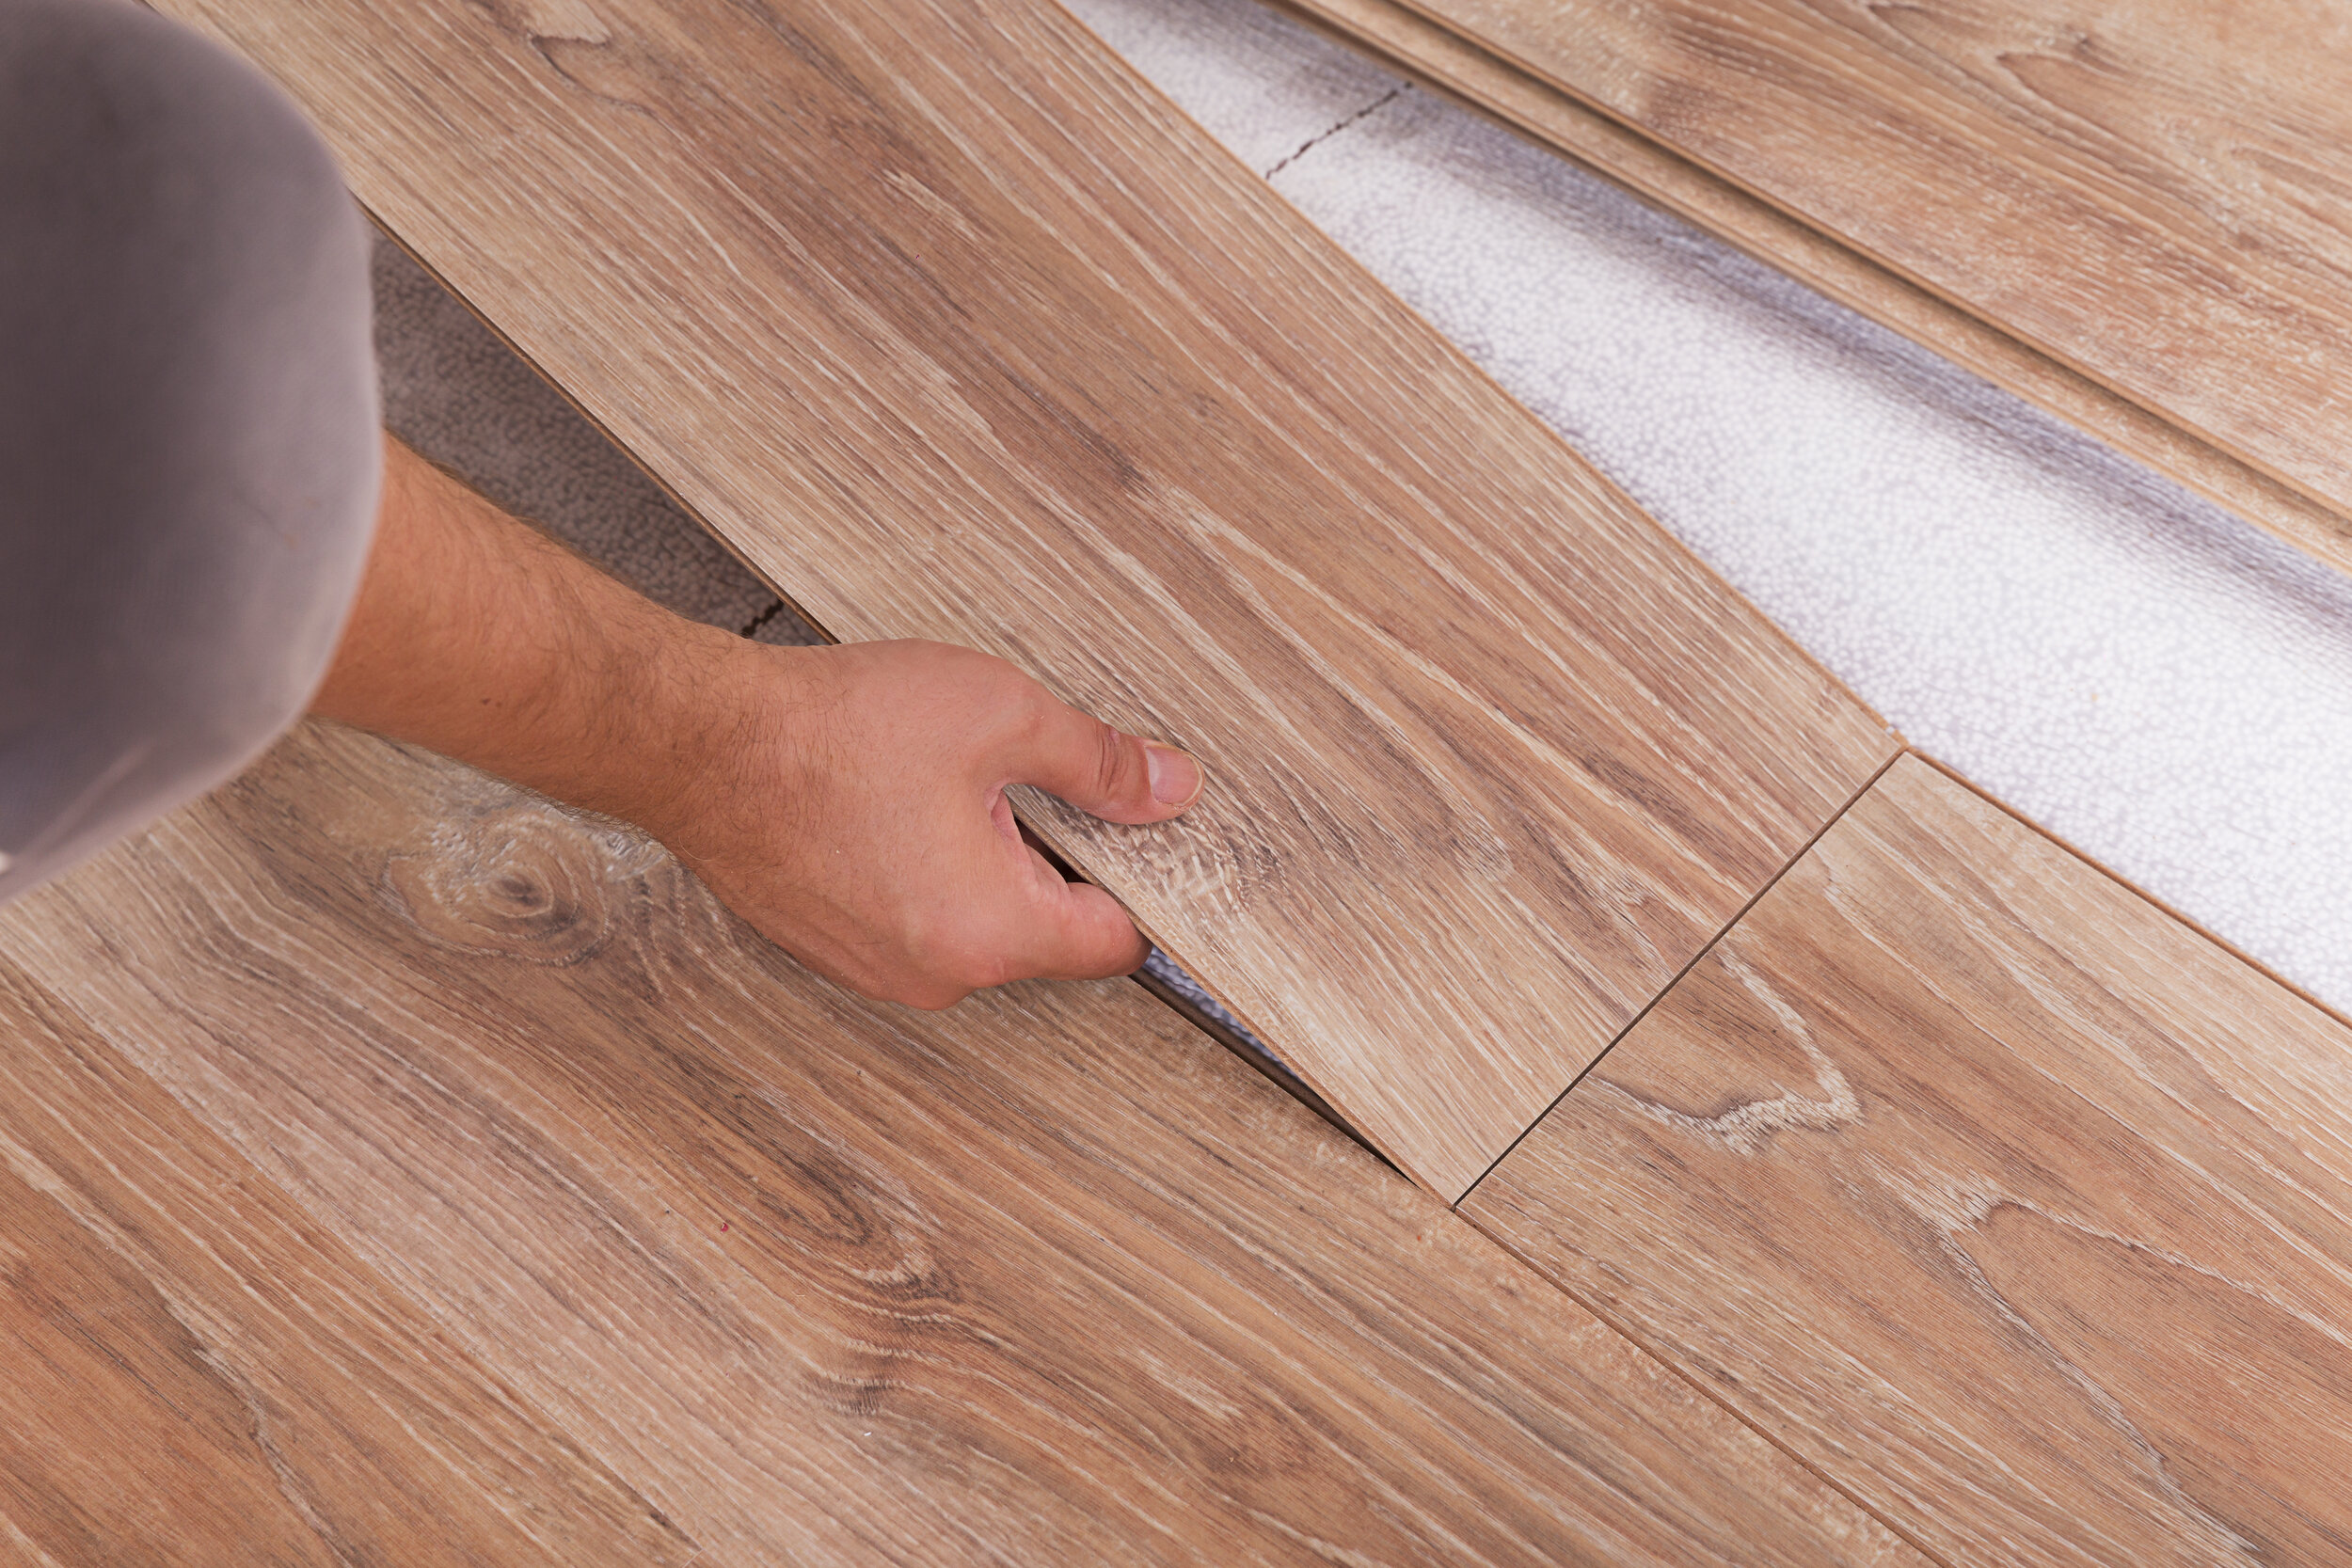 Waterproof Laminate Flooring, Is There A Way To Make Laminate Flooring Waterproof